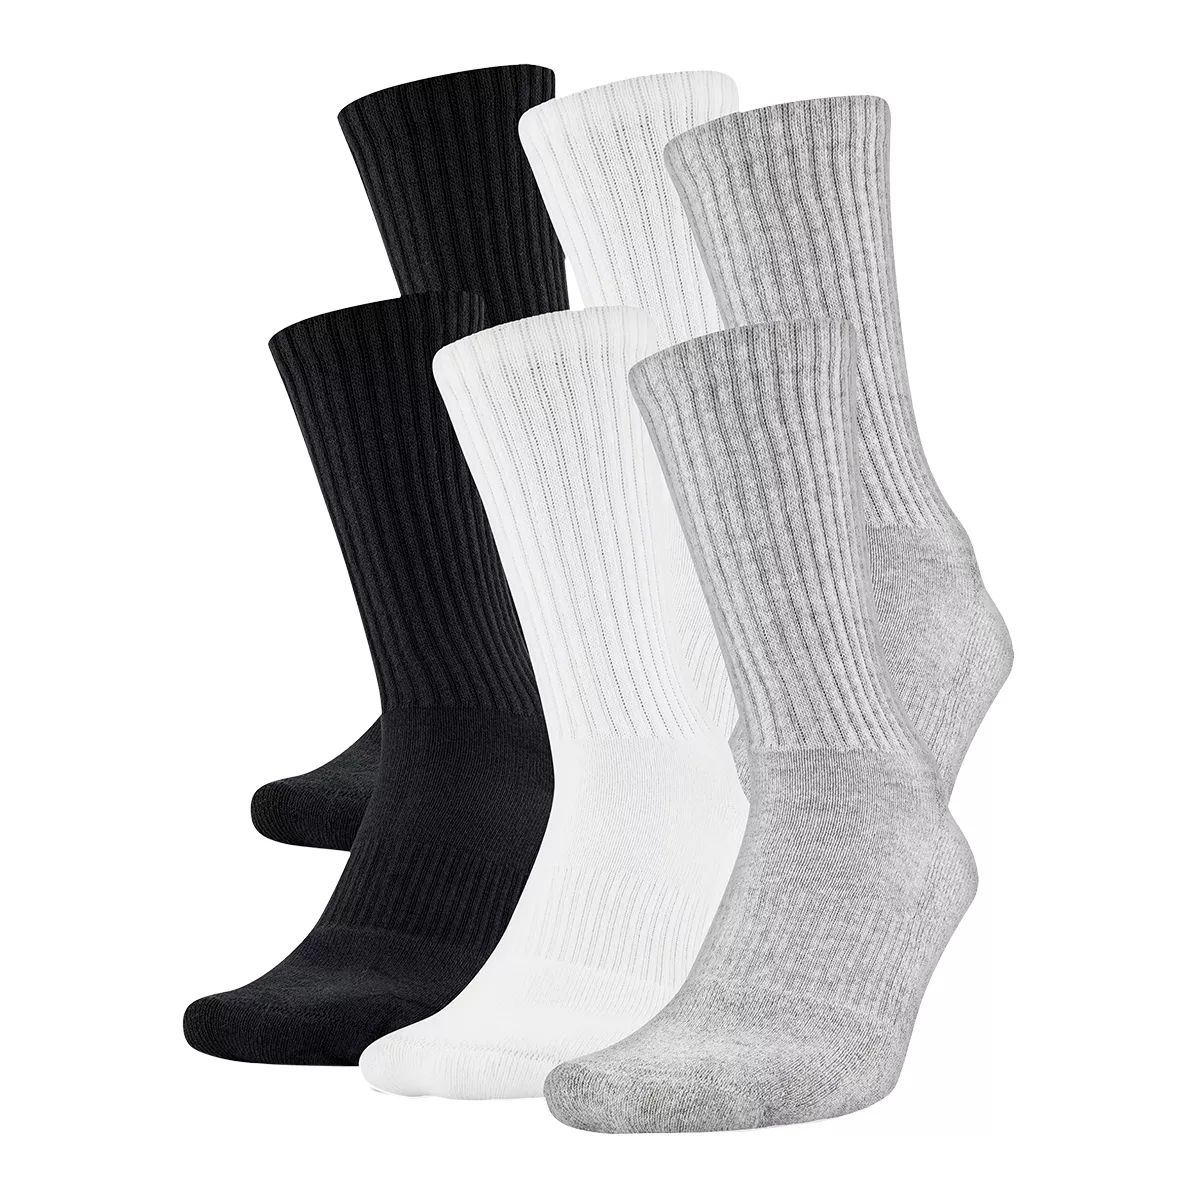 Under Armour Boys' Charged Cotton 2.0 Crew Socks - 6 Pack